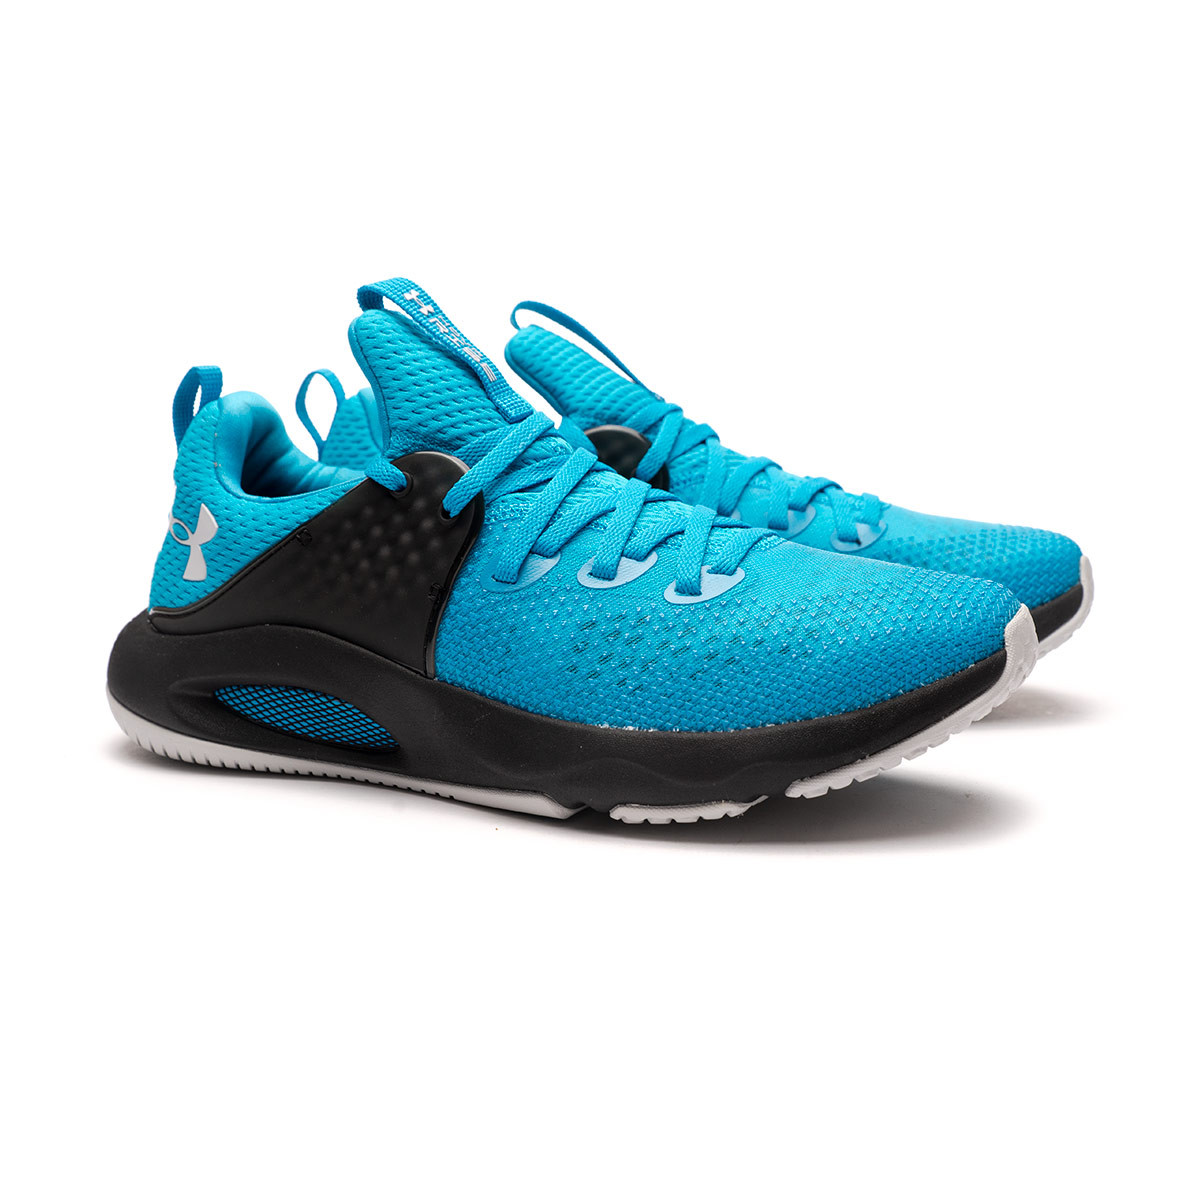 Blue Under Armour HOVR Rise Mens Training Shoes 